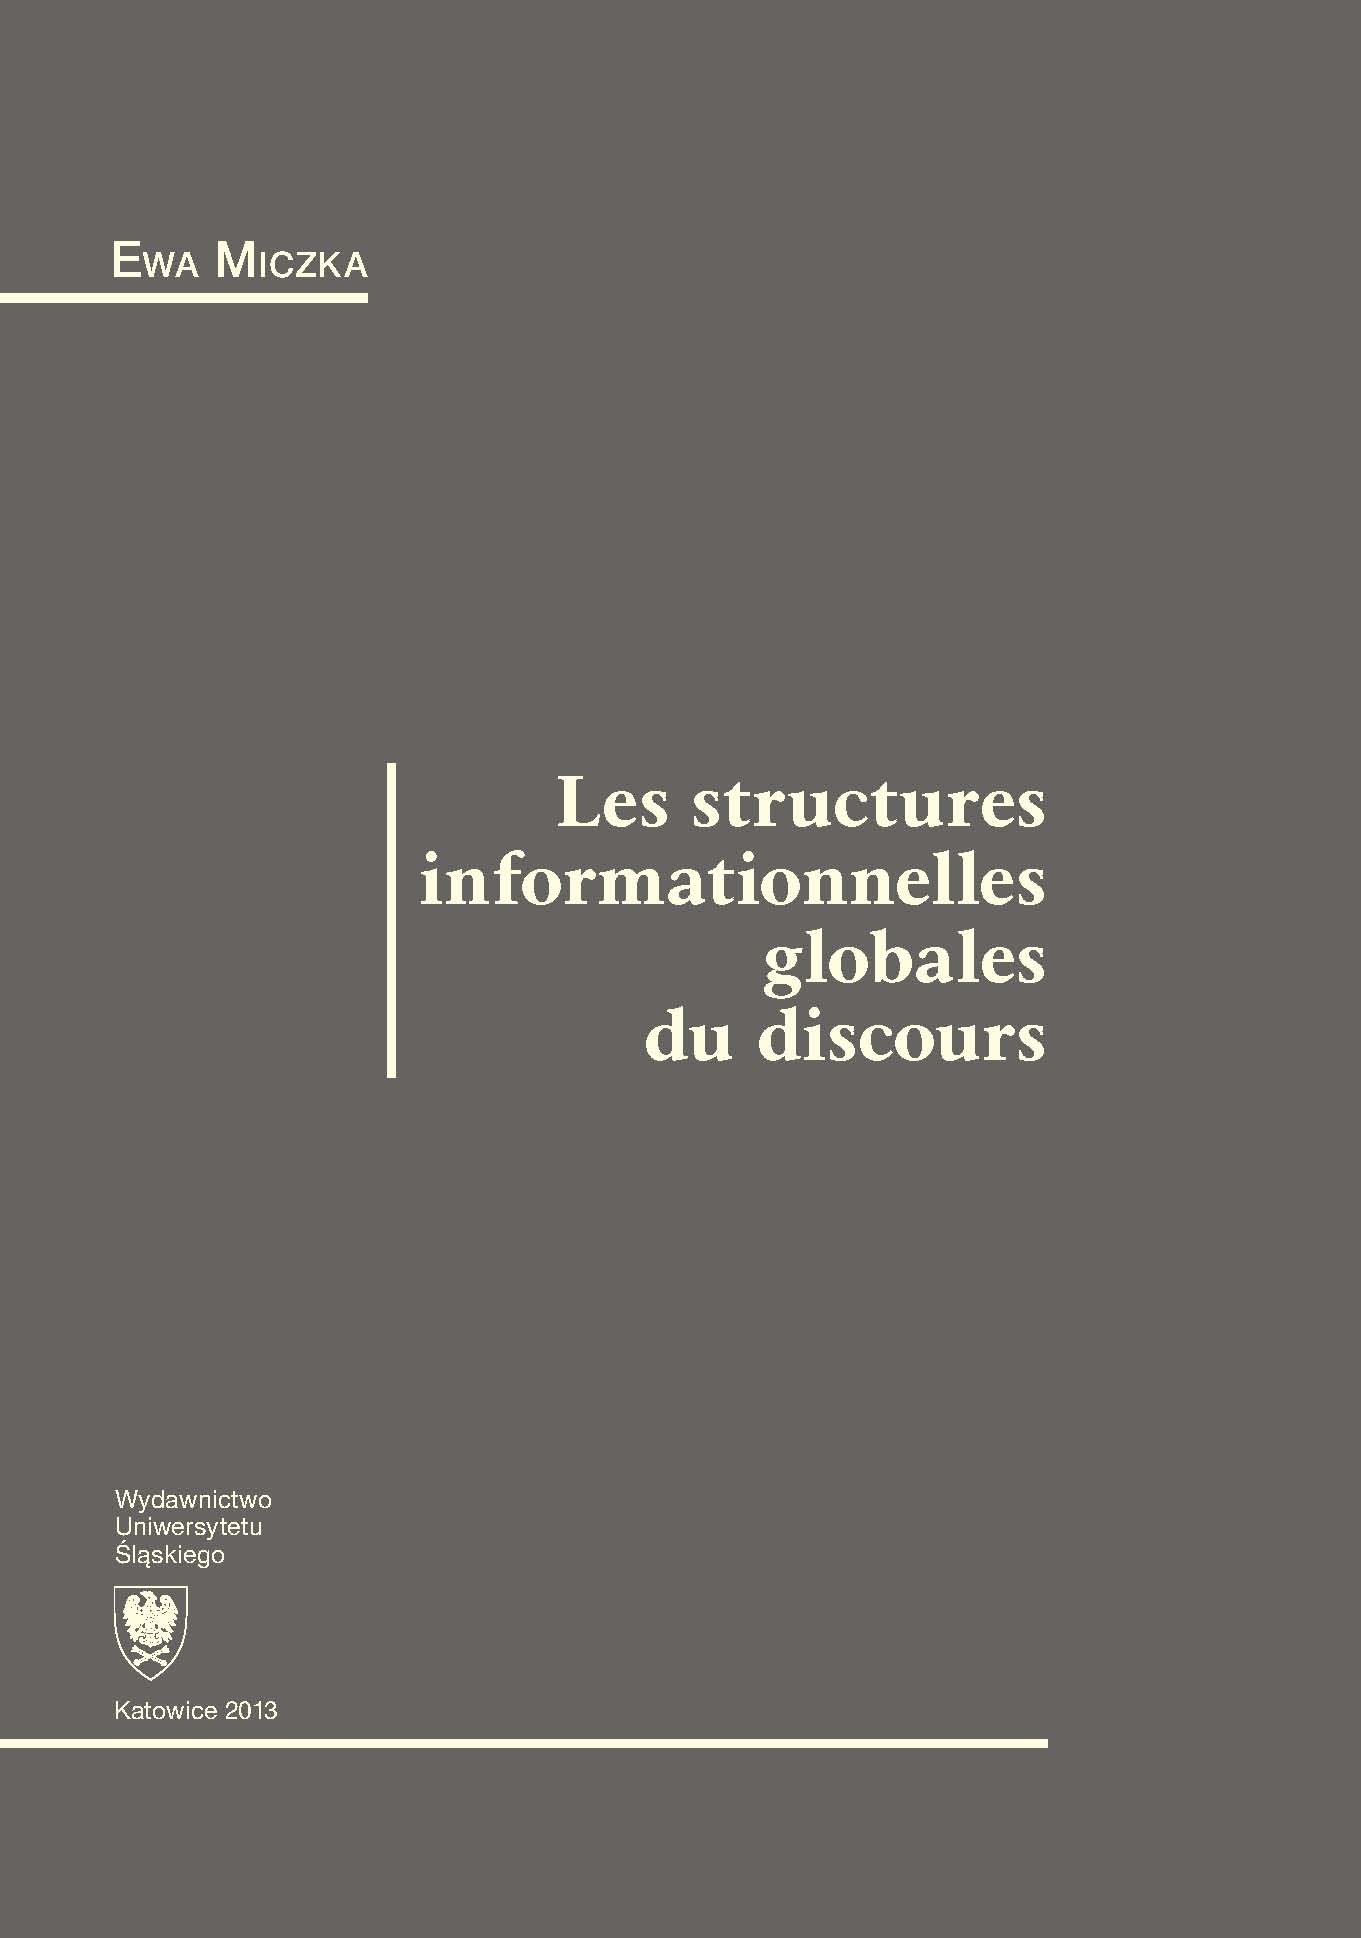 Global discourse information structure